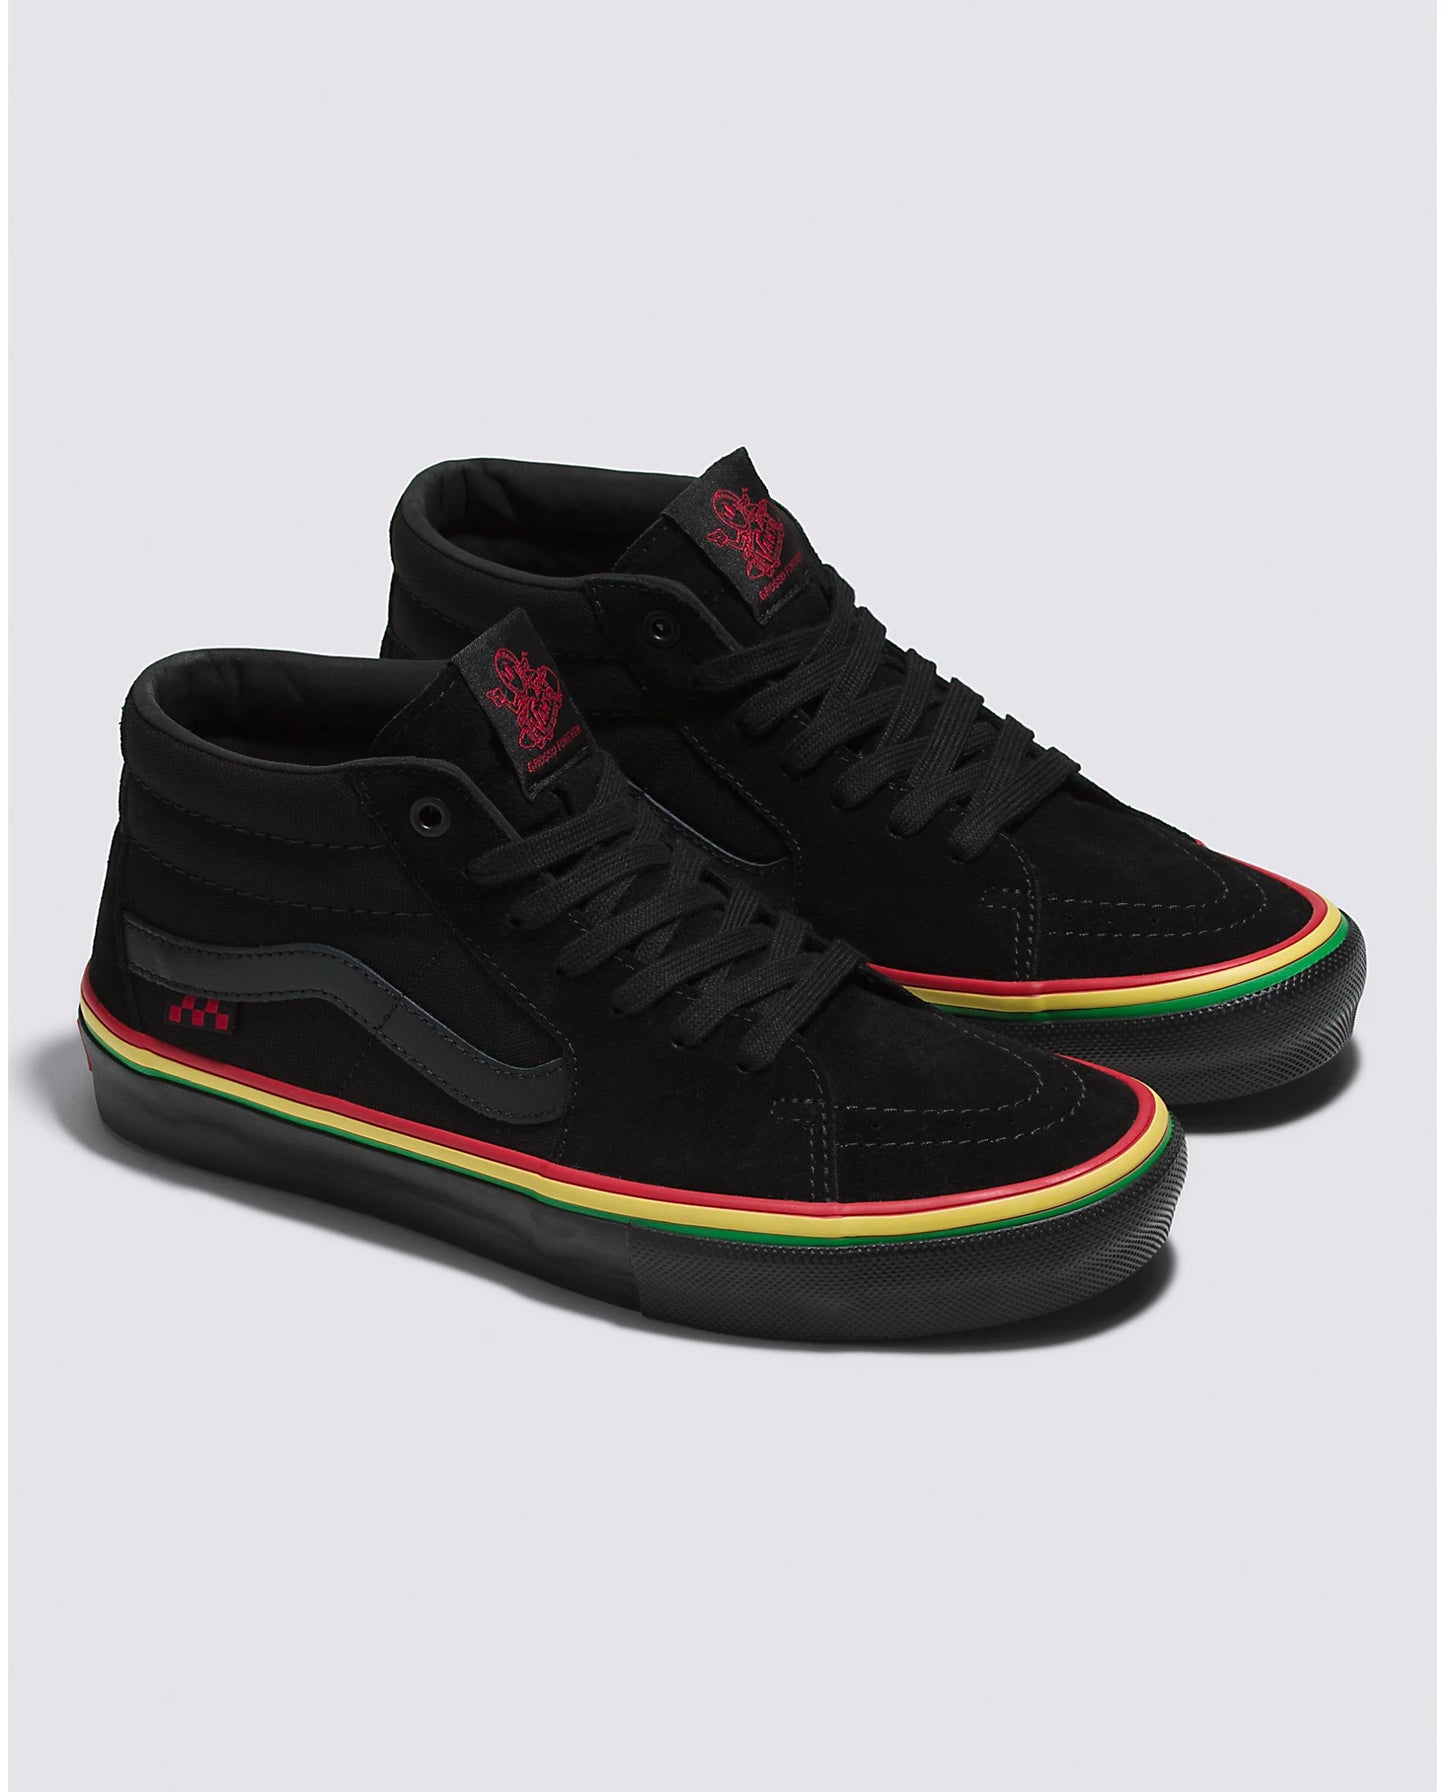 Rasta Skate Grosso Mid Shoe Blk(size options listed)